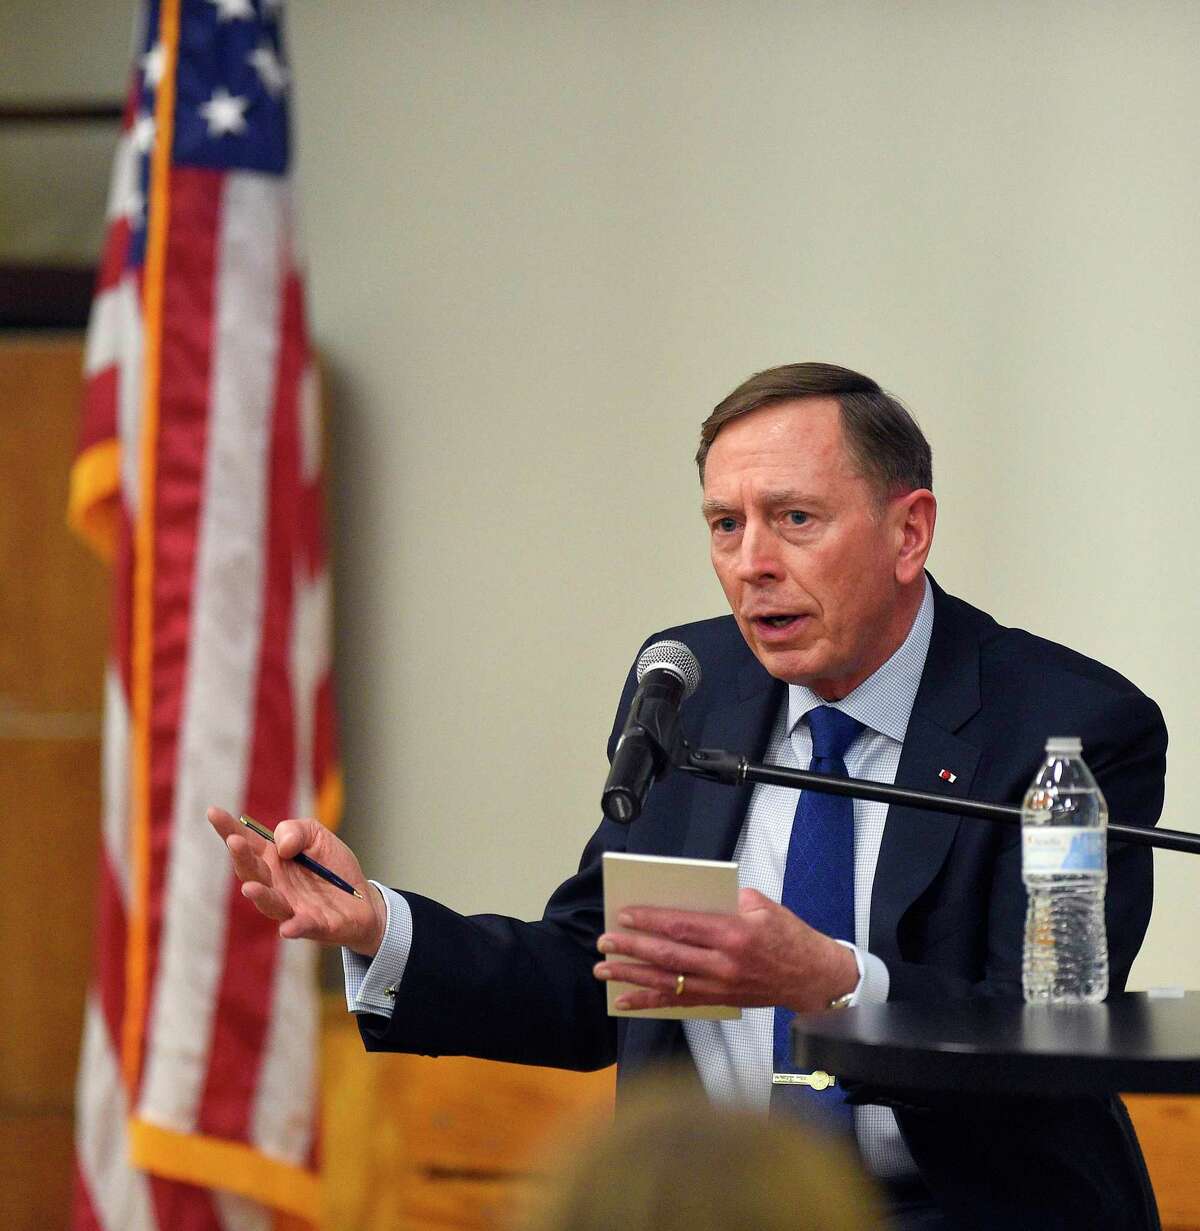 Retired U.S. Gen. David H. Petraeus speaks on “Civility in Public Service,” Tuesday, March 10, 2020 at the Ernest A. DiMattia, Jr. Building of The Ferguson Library in Stamford, Connecticut. Petraeus took part in a Q&A with John Breunig, editorial page editor of the Stamford Advocate and Greenwich Time, answering questions from the audience of various topics, following his introduction by Jan Dilenschneider. His appearance is part of a series on Civility in America sponsored by The Dilenschneider Group, Hearst Media Group in Connecticut and The Ferguson Library.